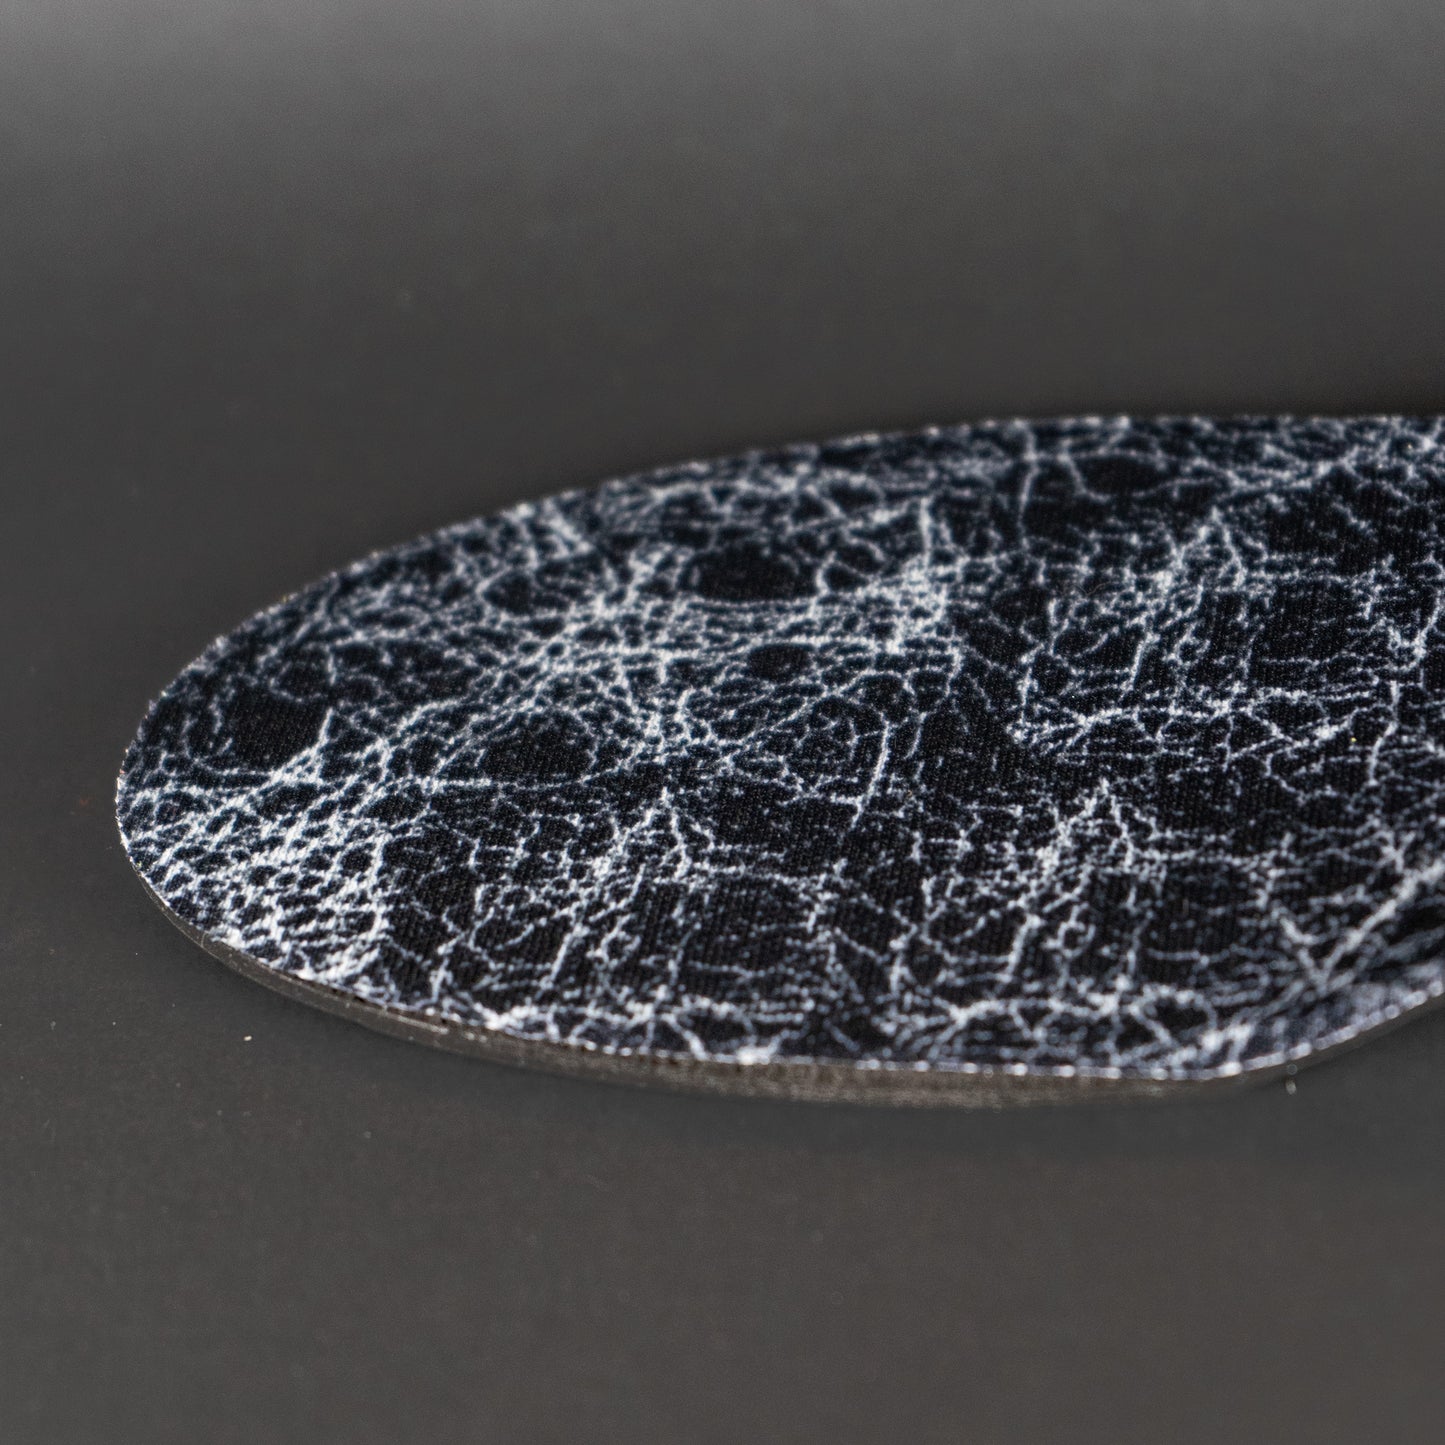 Slim Insoles - Silver AG 2.0